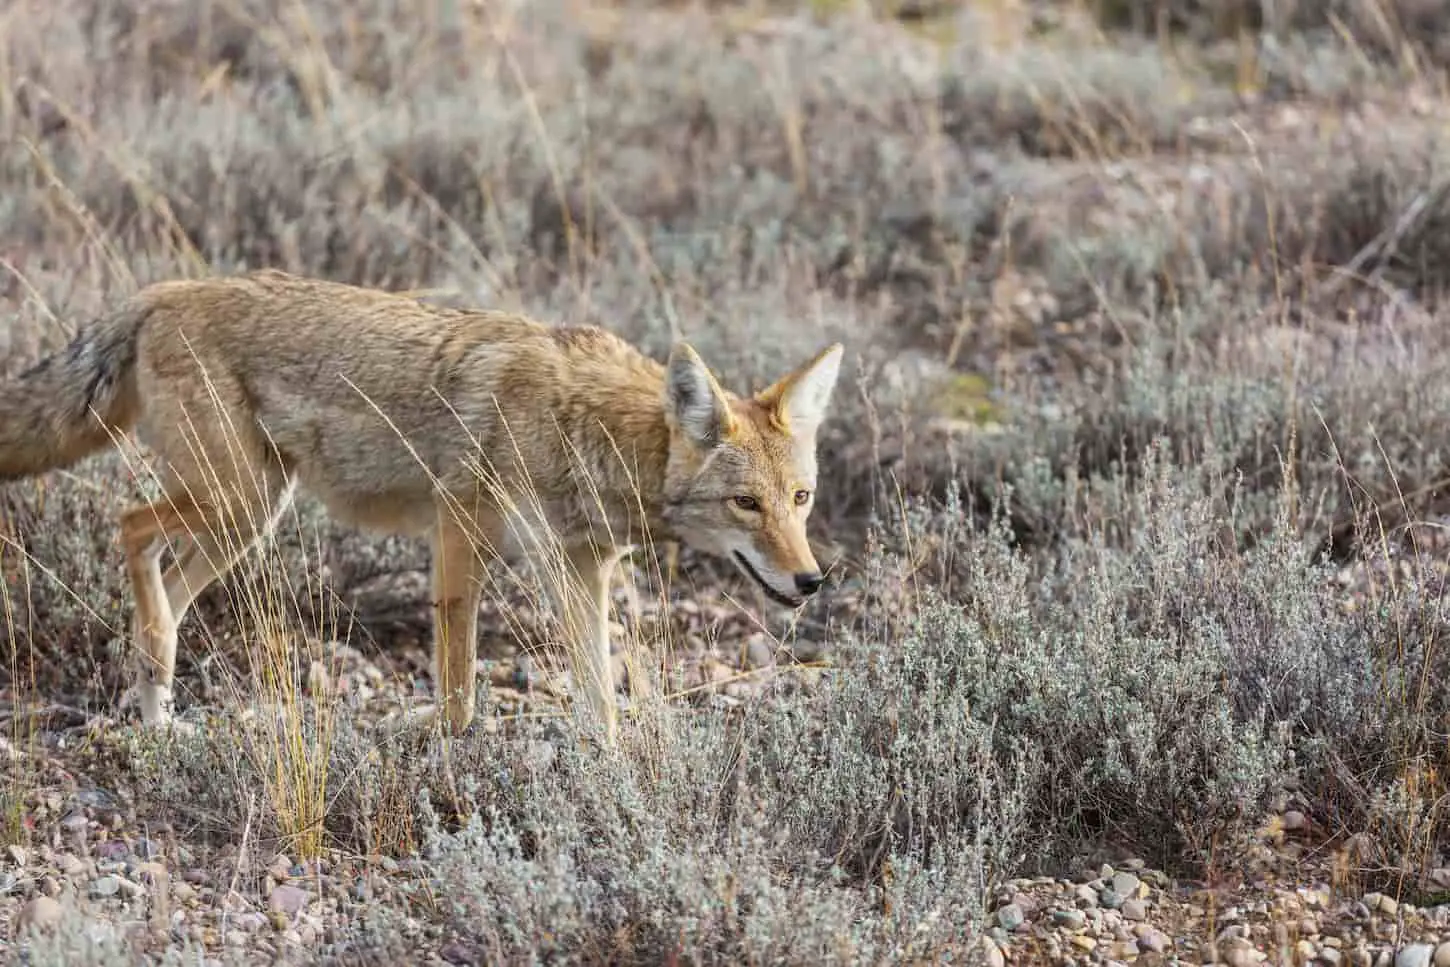 Do Electric Fences Keep Coyotes Out?